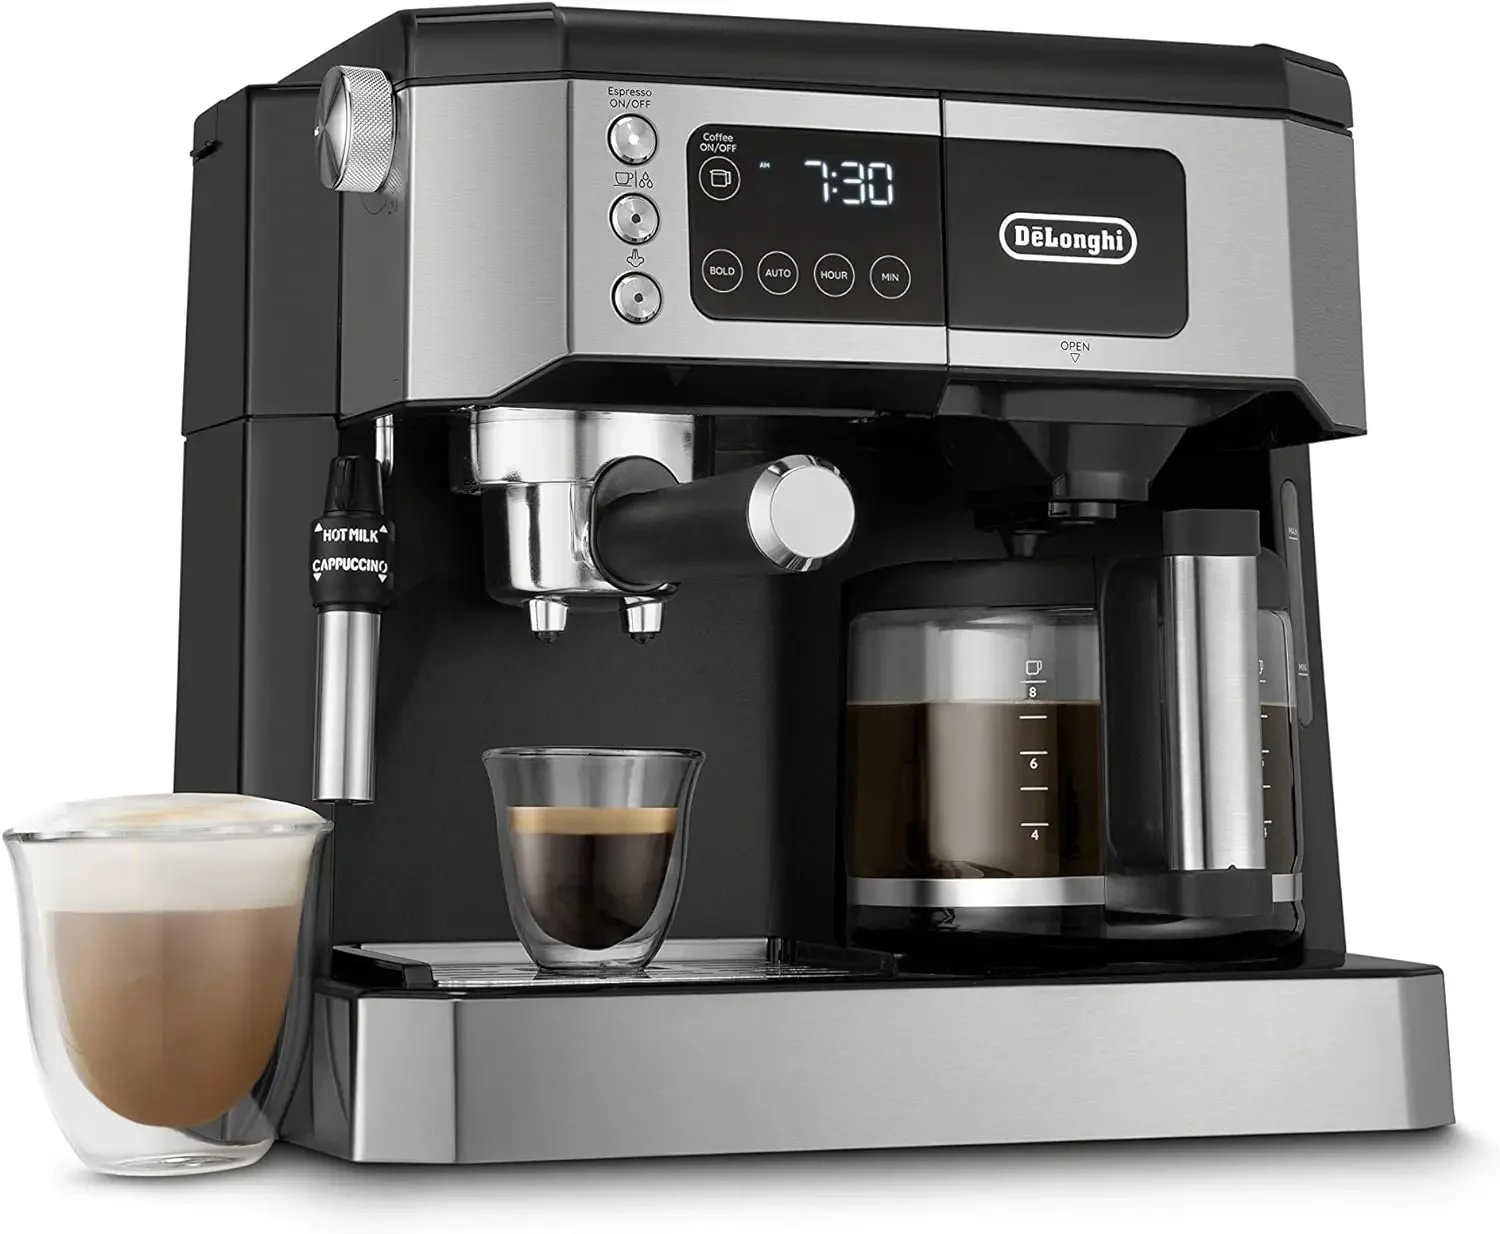 

Kitchen suppliesDe'Longhi All-in-One Combination Coffee Maker & Espresso Machine + Advanced Adjustable Milk Frother for Cappucci